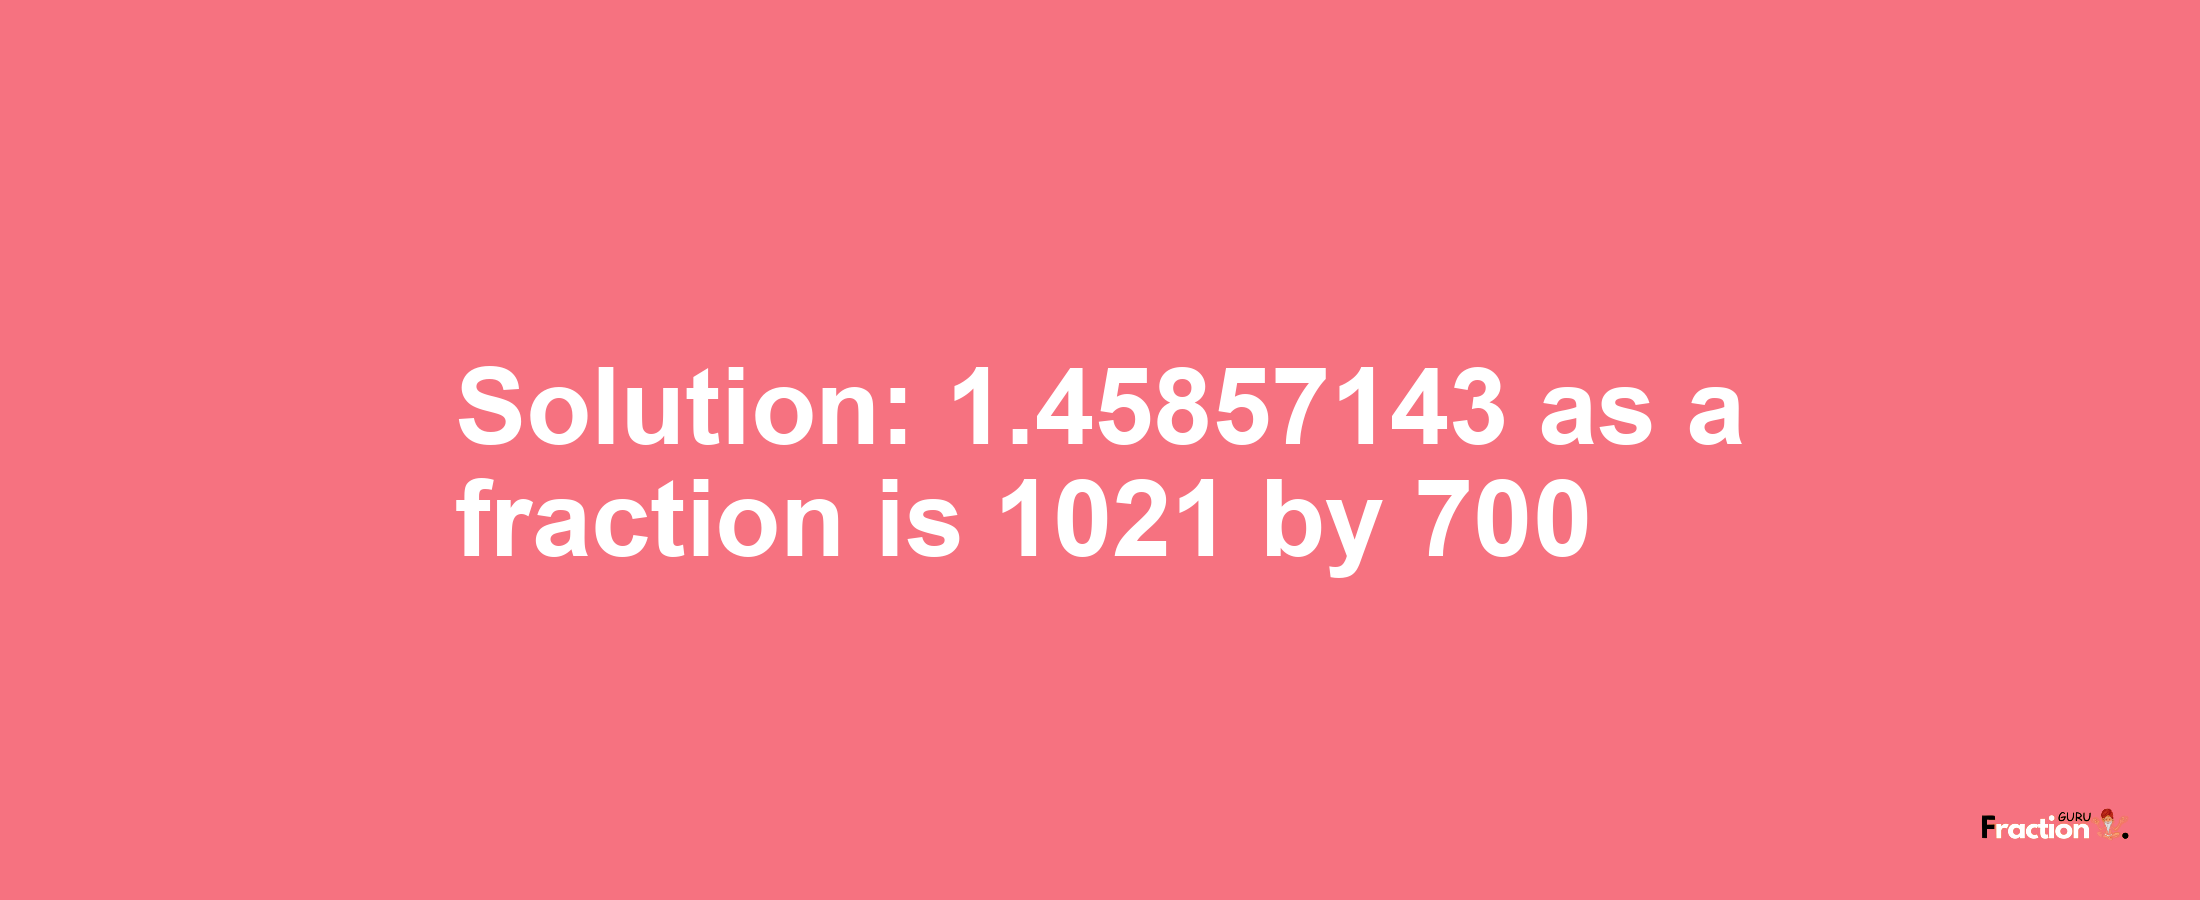 Solution:1.45857143 as a fraction is 1021/700